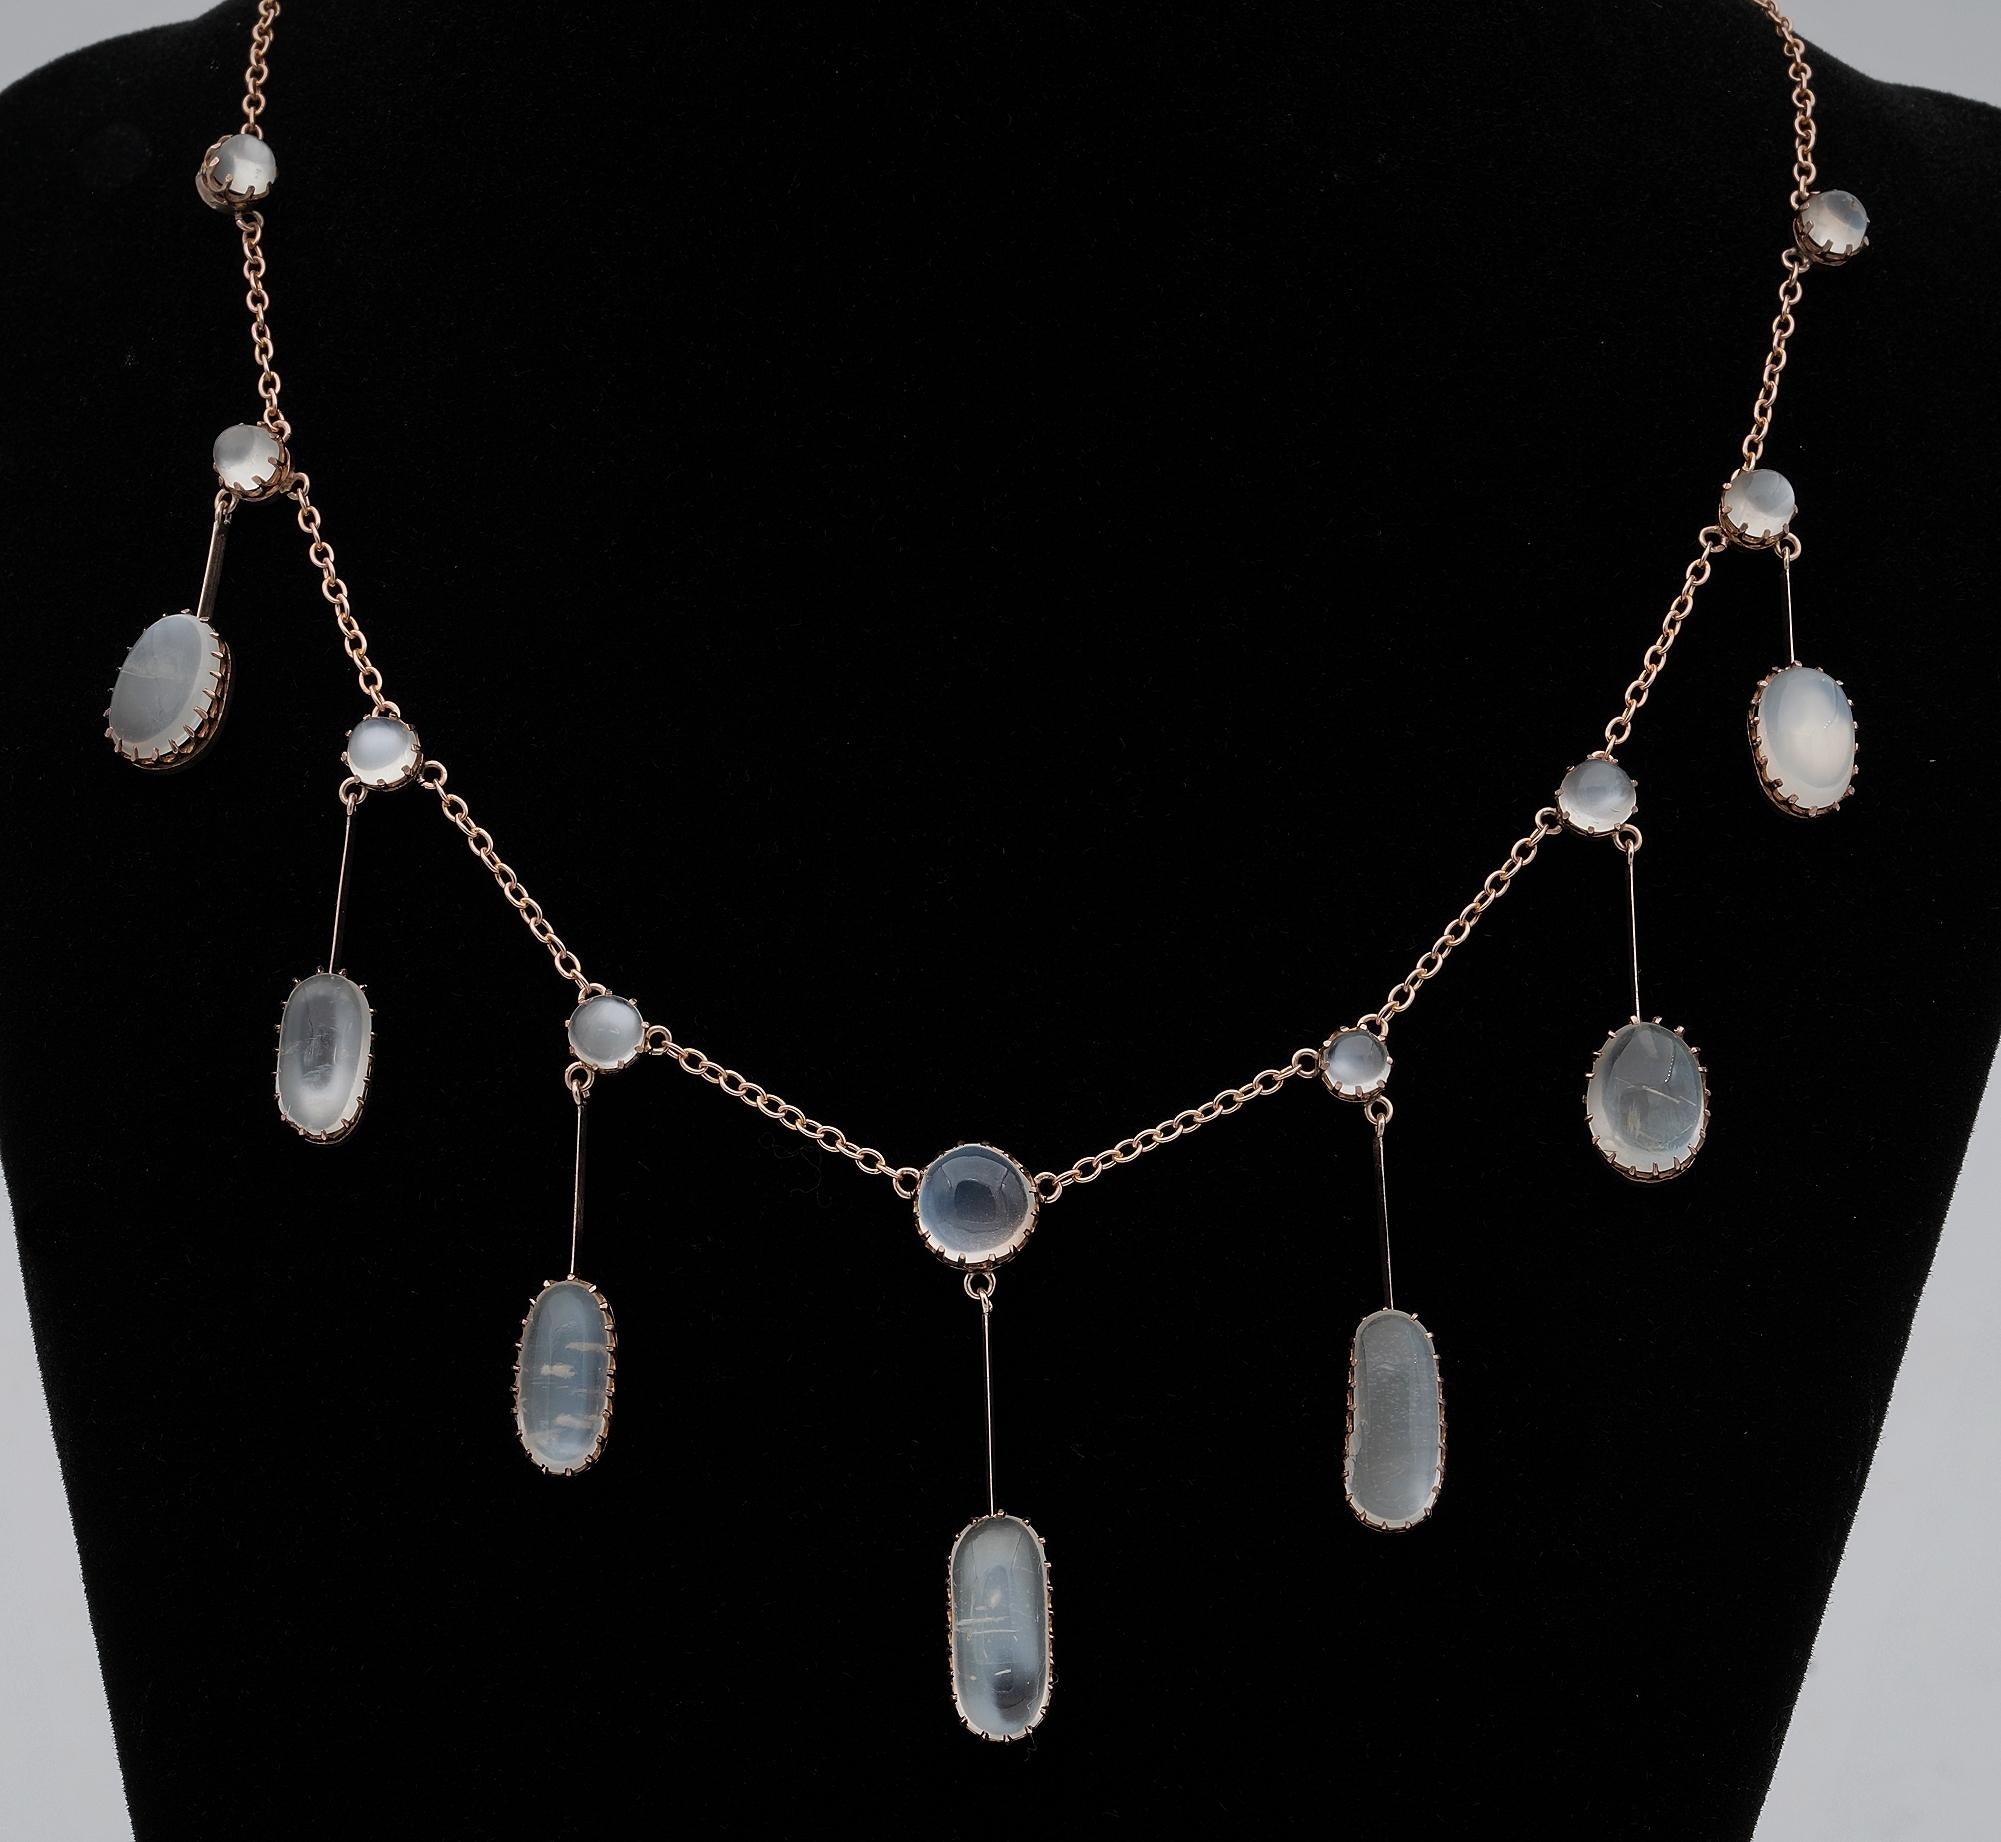 Victorian Must Have
This beautiful Victorian era Moonstone necklace is the classy must have or great addition at any good collection
1890 ca – beautiful hand crafted an mounted in 18 Kt yellow gold – tested
Lovely composition of various cabochon cut